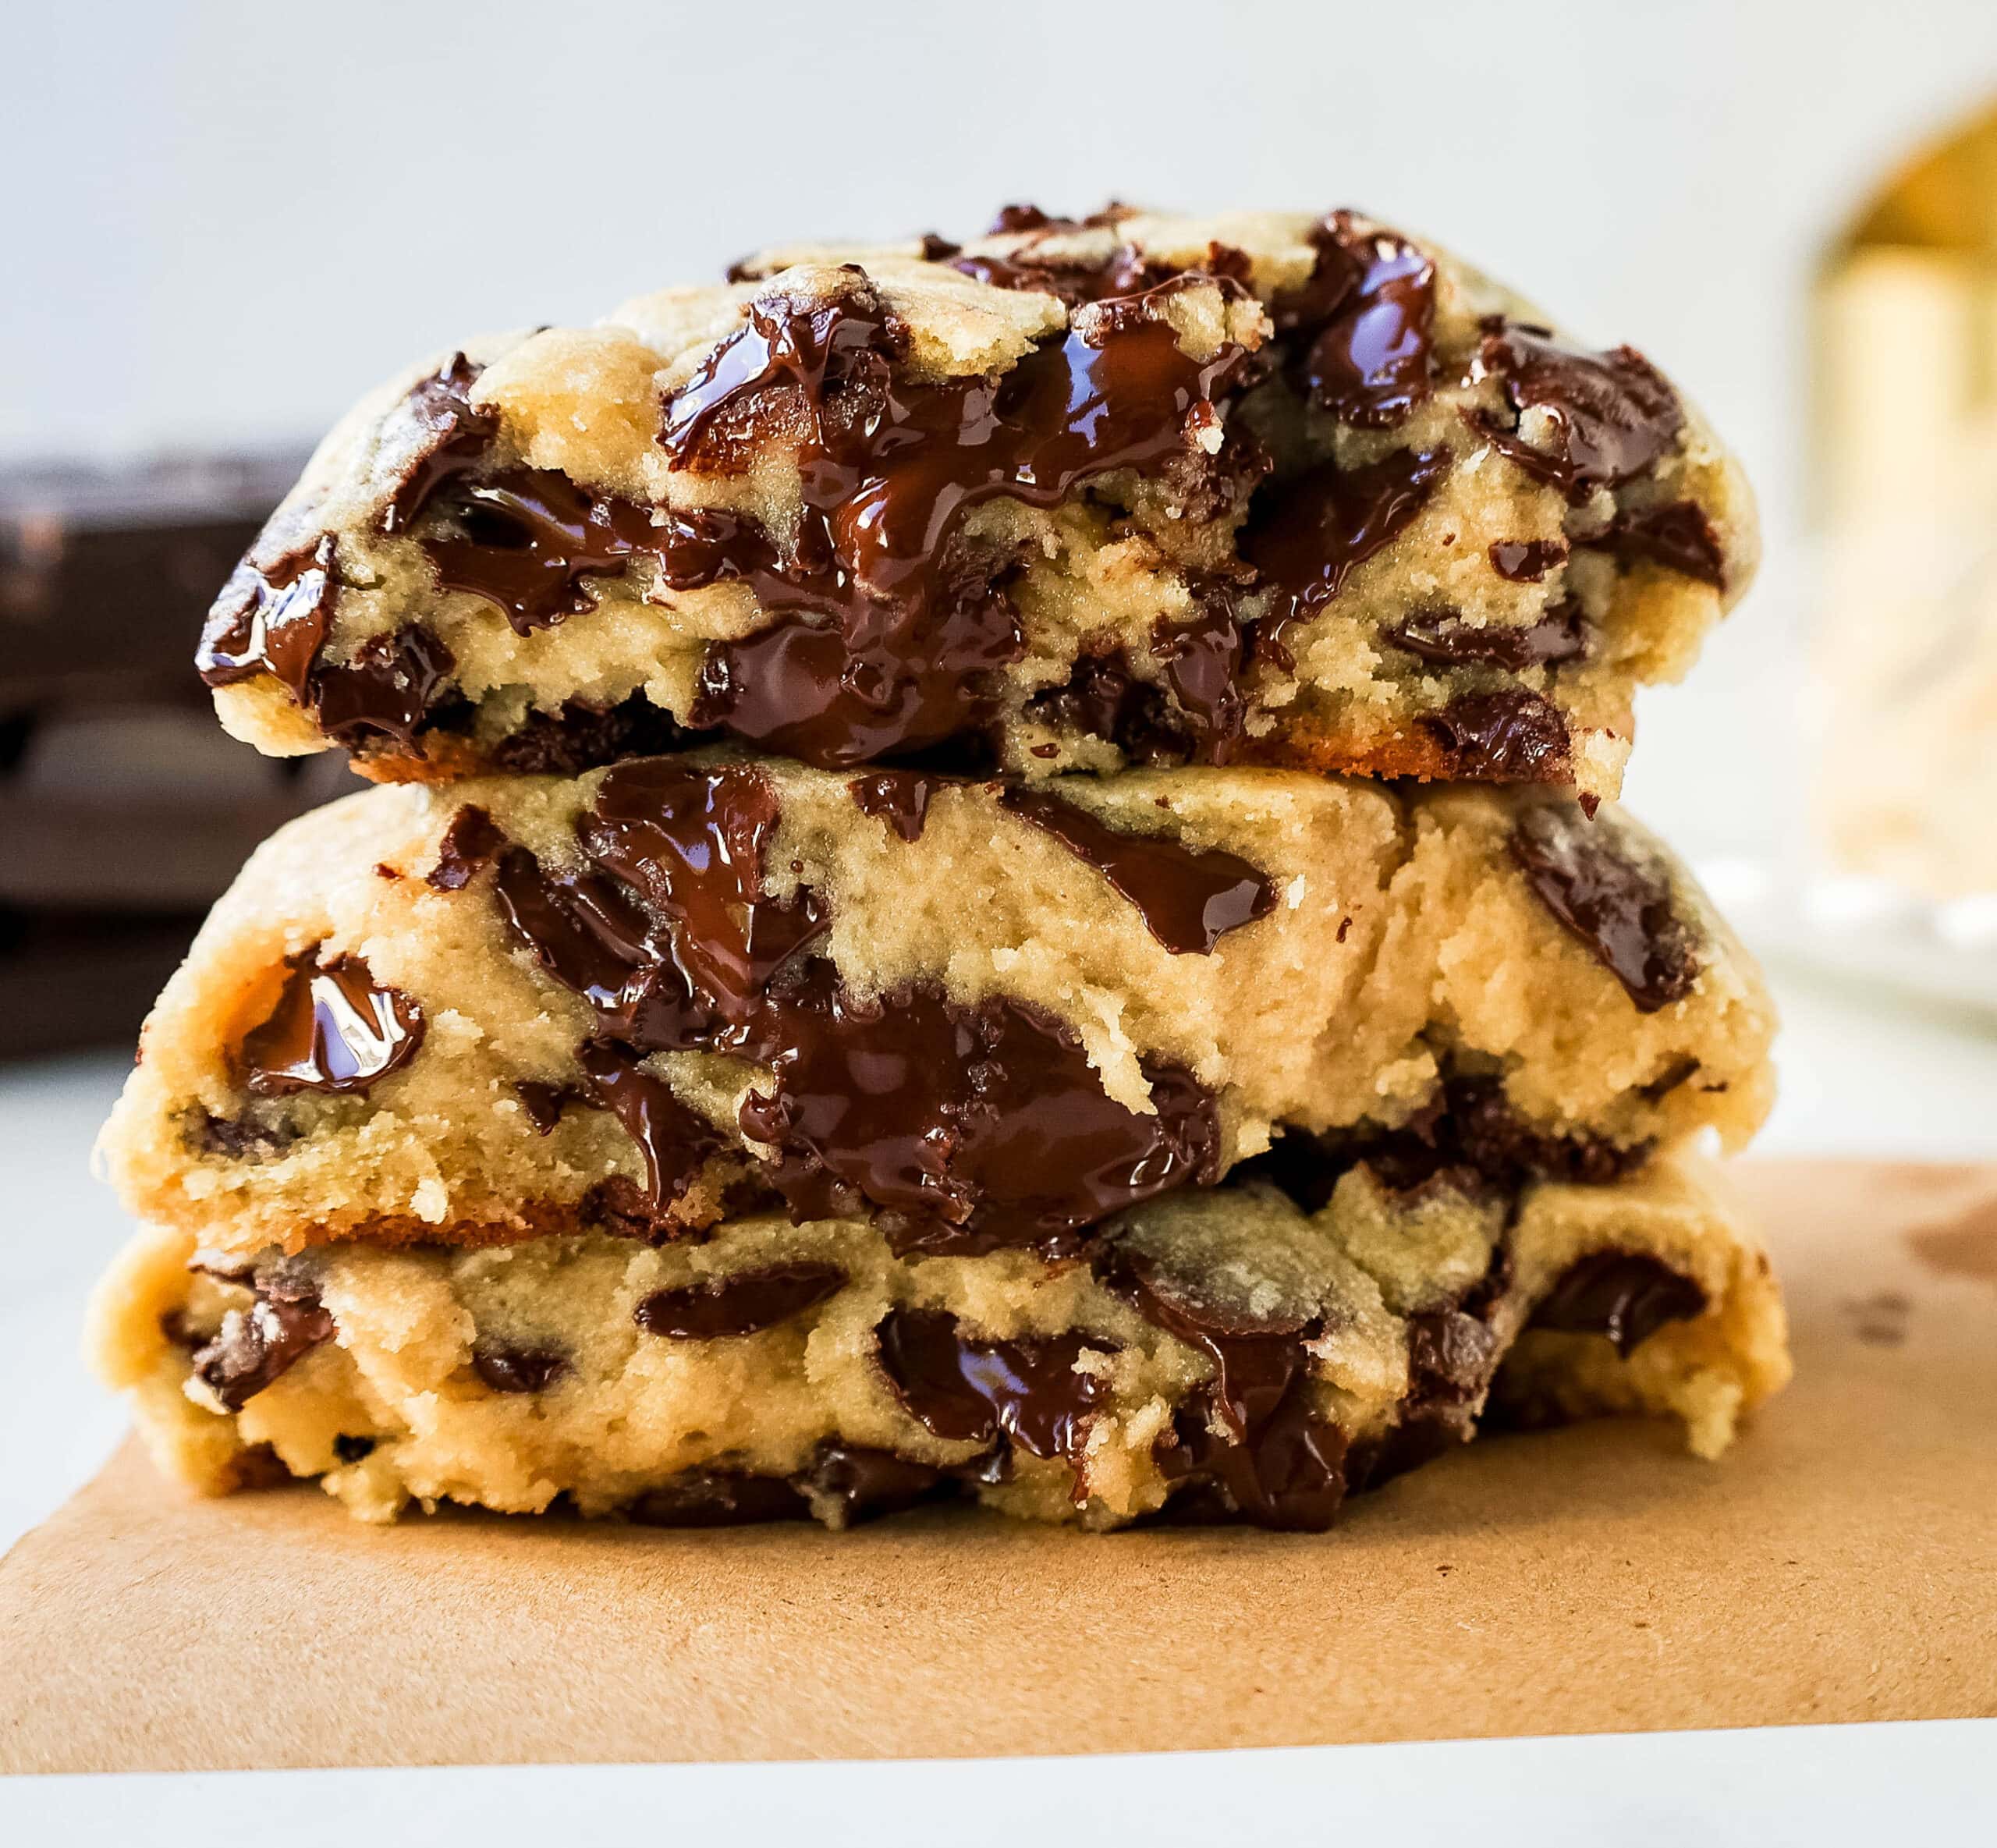 https://www.modernhoney.com/wp-content/uploads/2022/12/Levain-Bakery-Two-Chip-Chocolate-Chip-Cookies-10-scaled.jpg